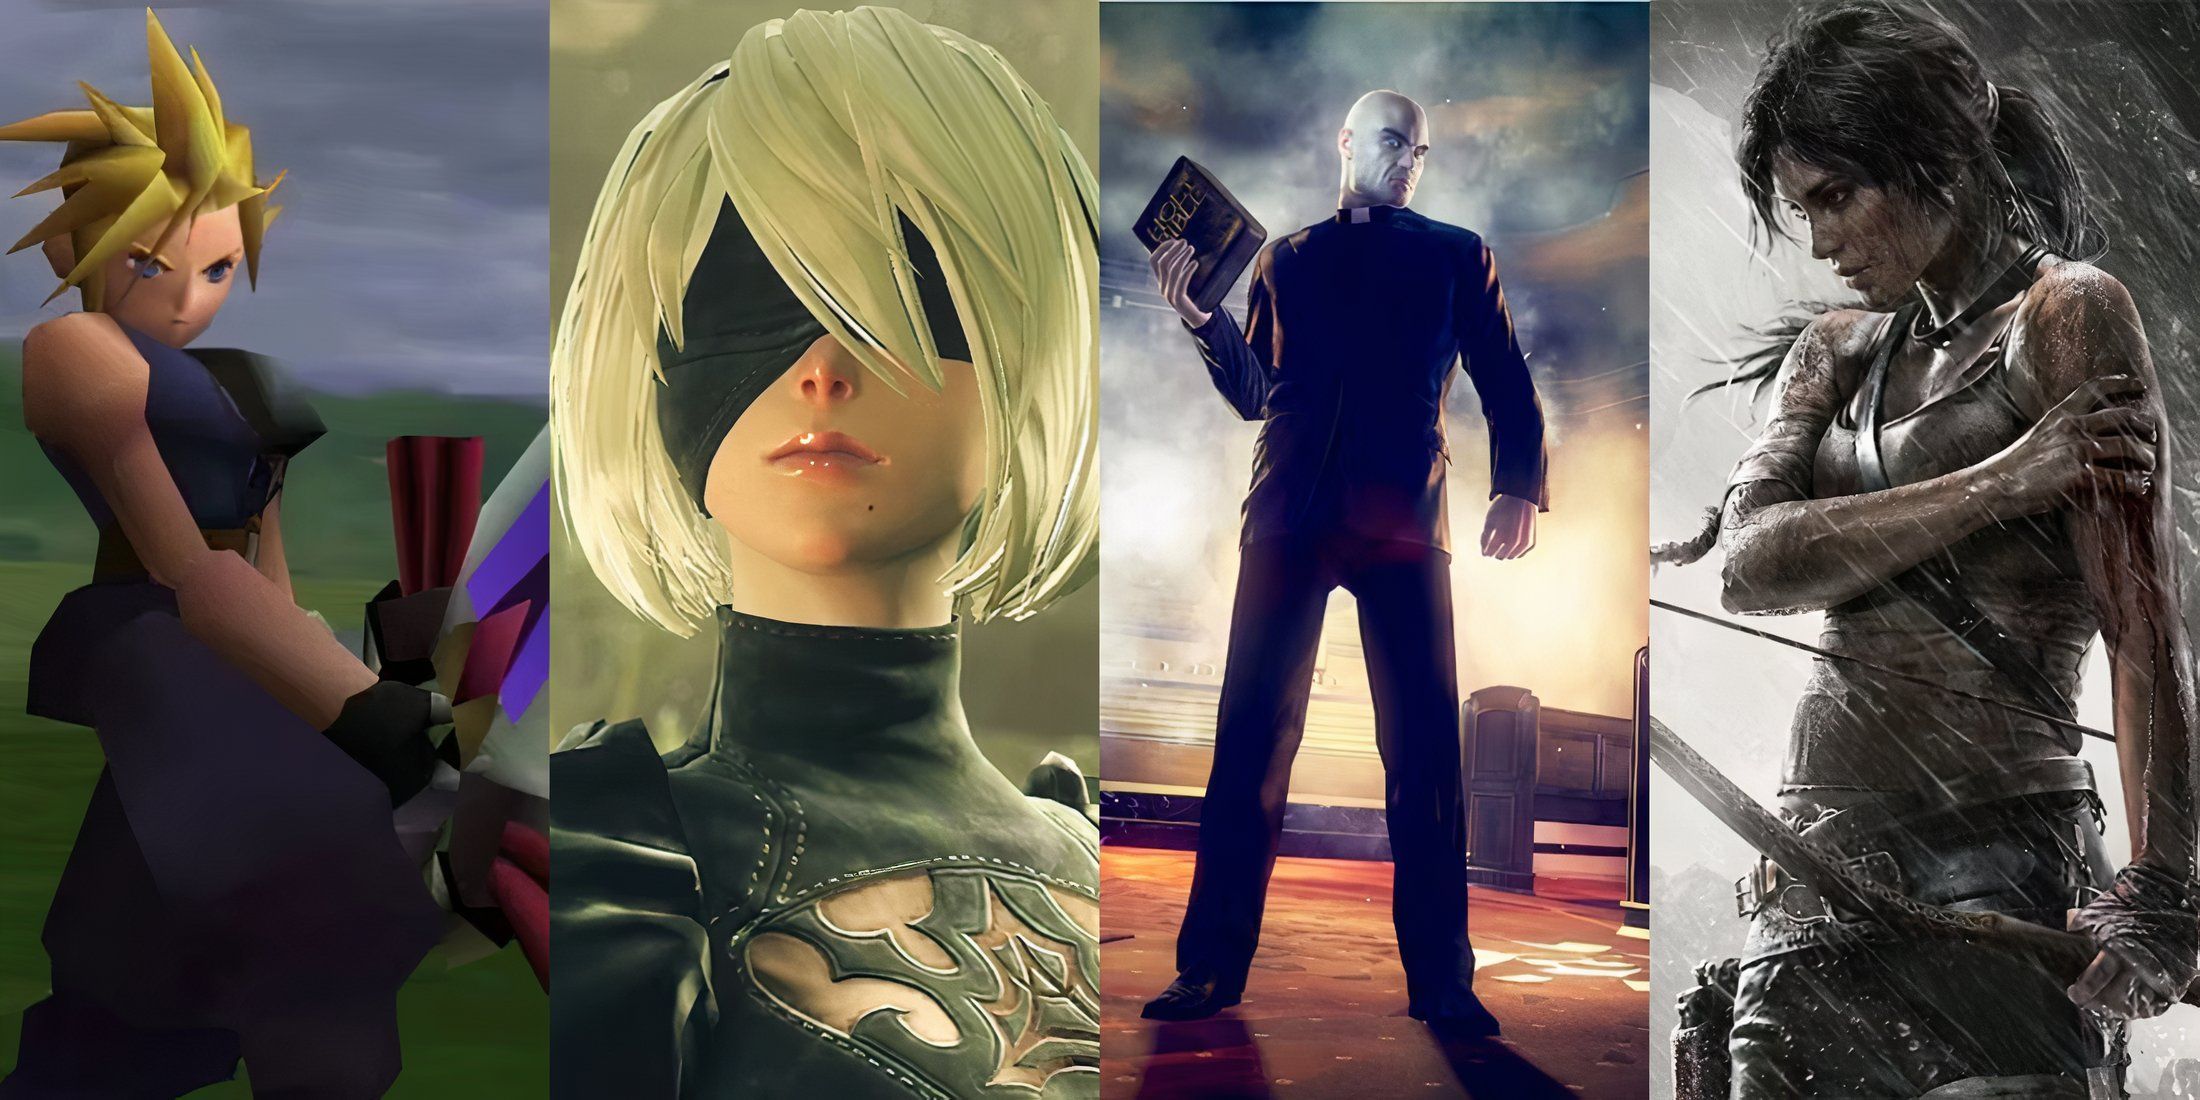 Feature image with protagonists of FF7, Nier Automata, Tomb Raider and Hitman for most influential Square Enix games.